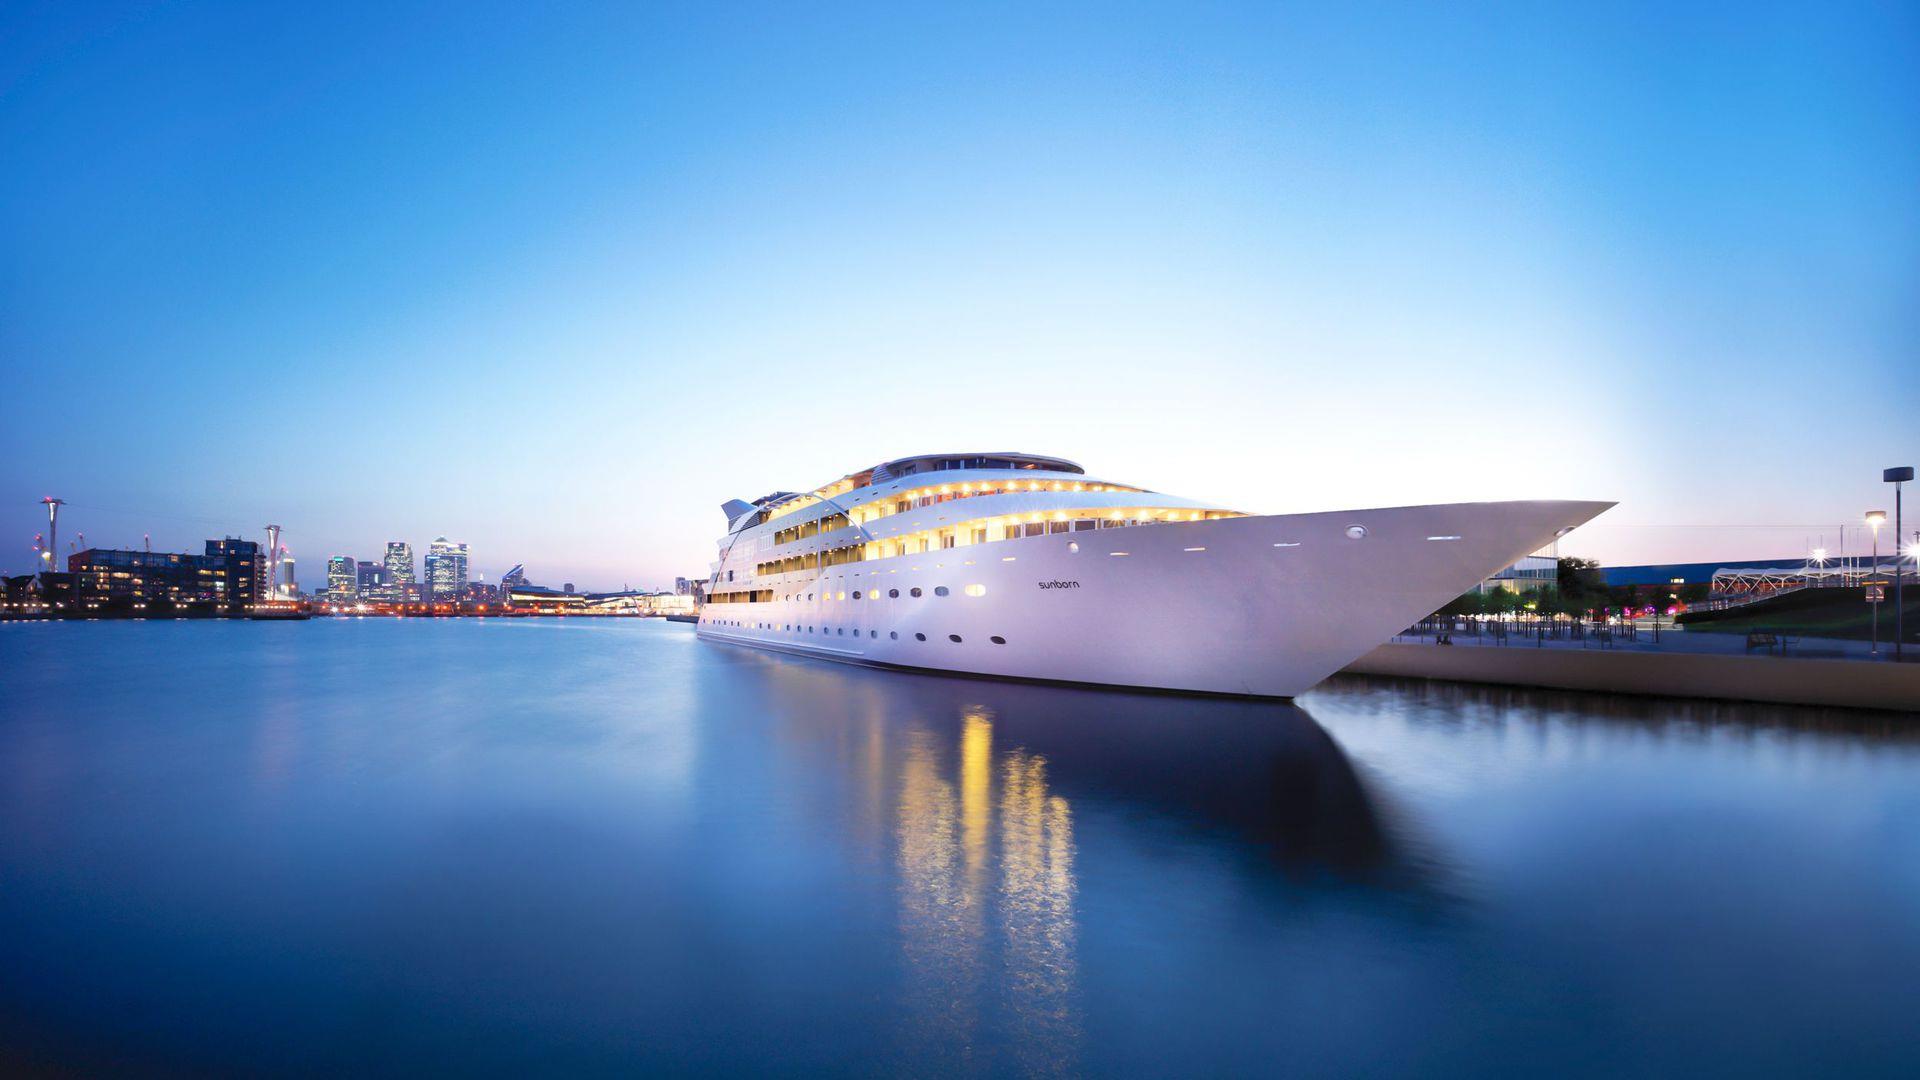 The Sunborn London is a yacht hotel, floating in the Royal Docks in London's Docklands.